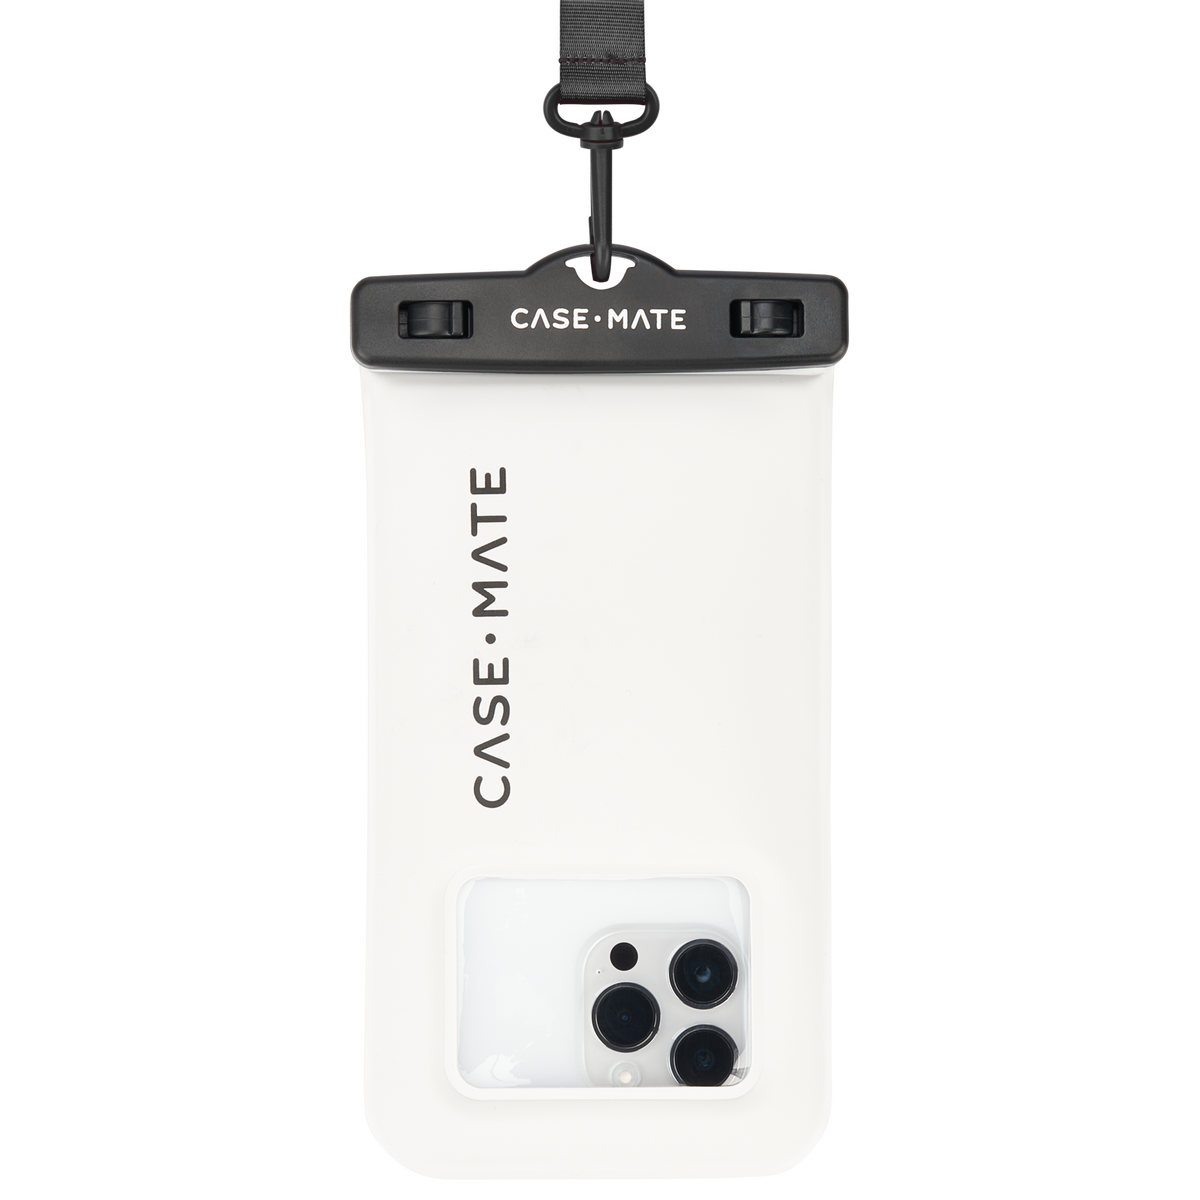 CASE-MATE Universal Waterproof Floating Phone Pouch - Gray/Black